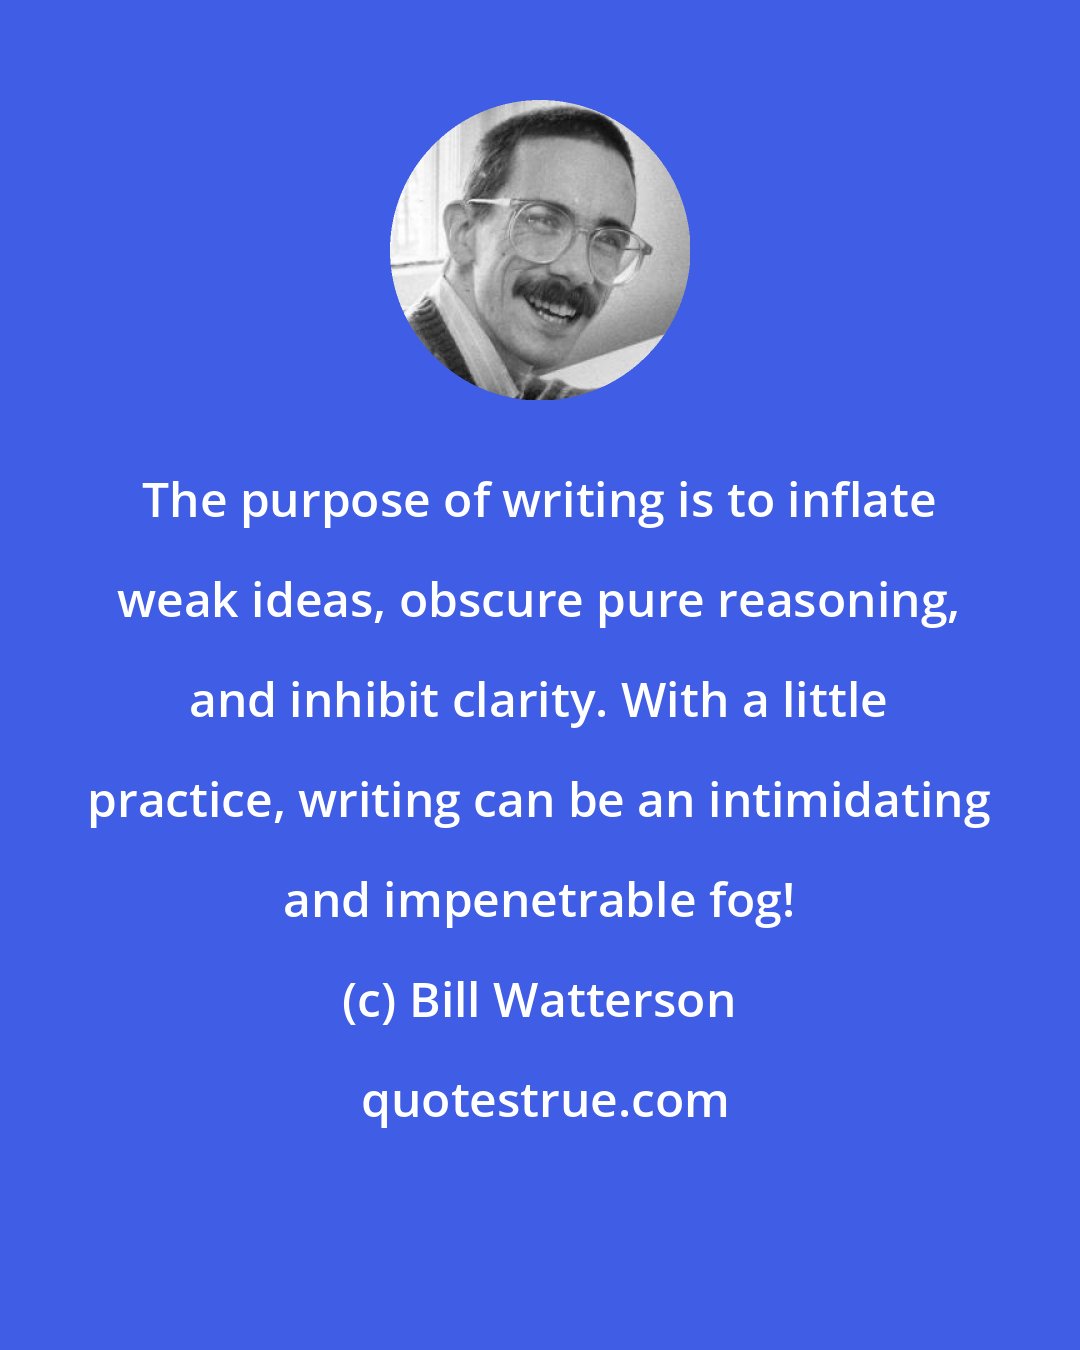 Bill Watterson: The purpose of writing is to inflate weak ideas, obscure pure reasoning, and inhibit clarity. With a little practice, writing can be an intimidating and impenetrable fog!